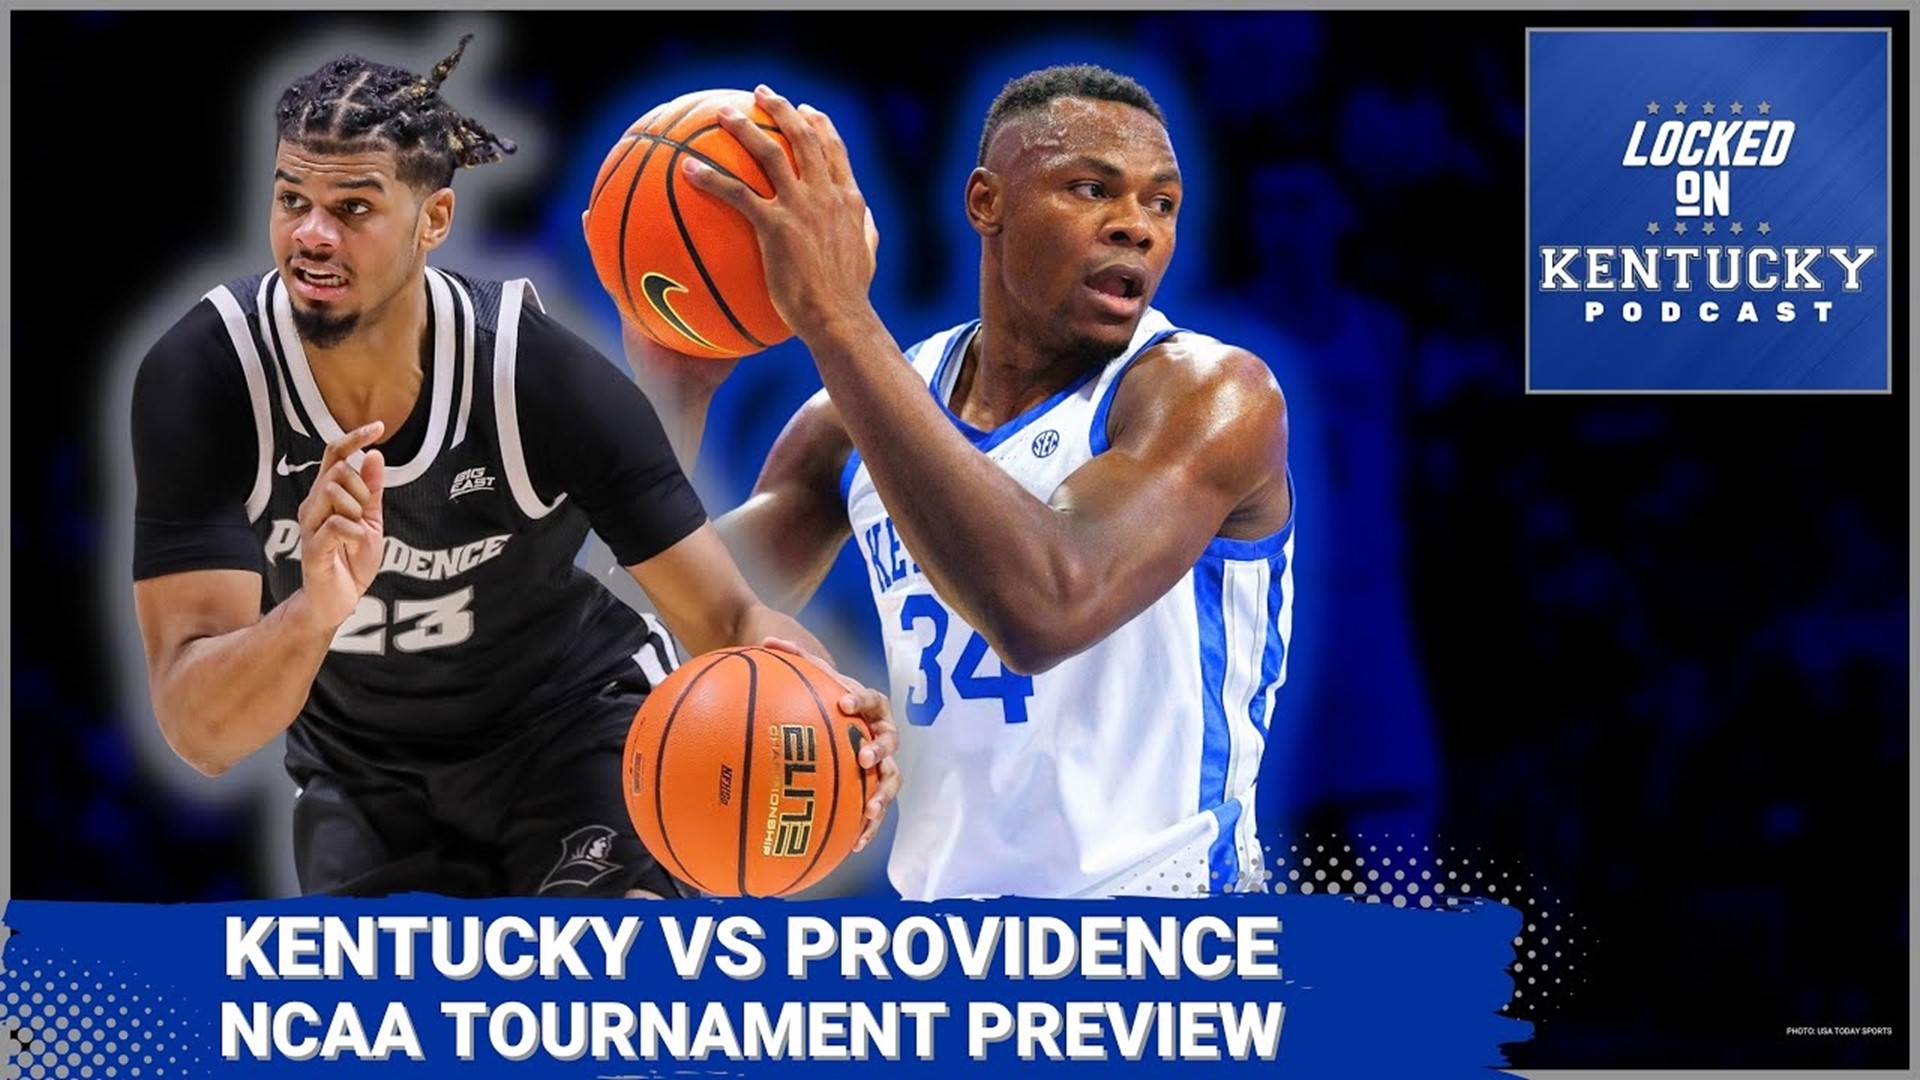 Can Kentucky basketball get a win in the NCAA tournament over the Providence Friars?